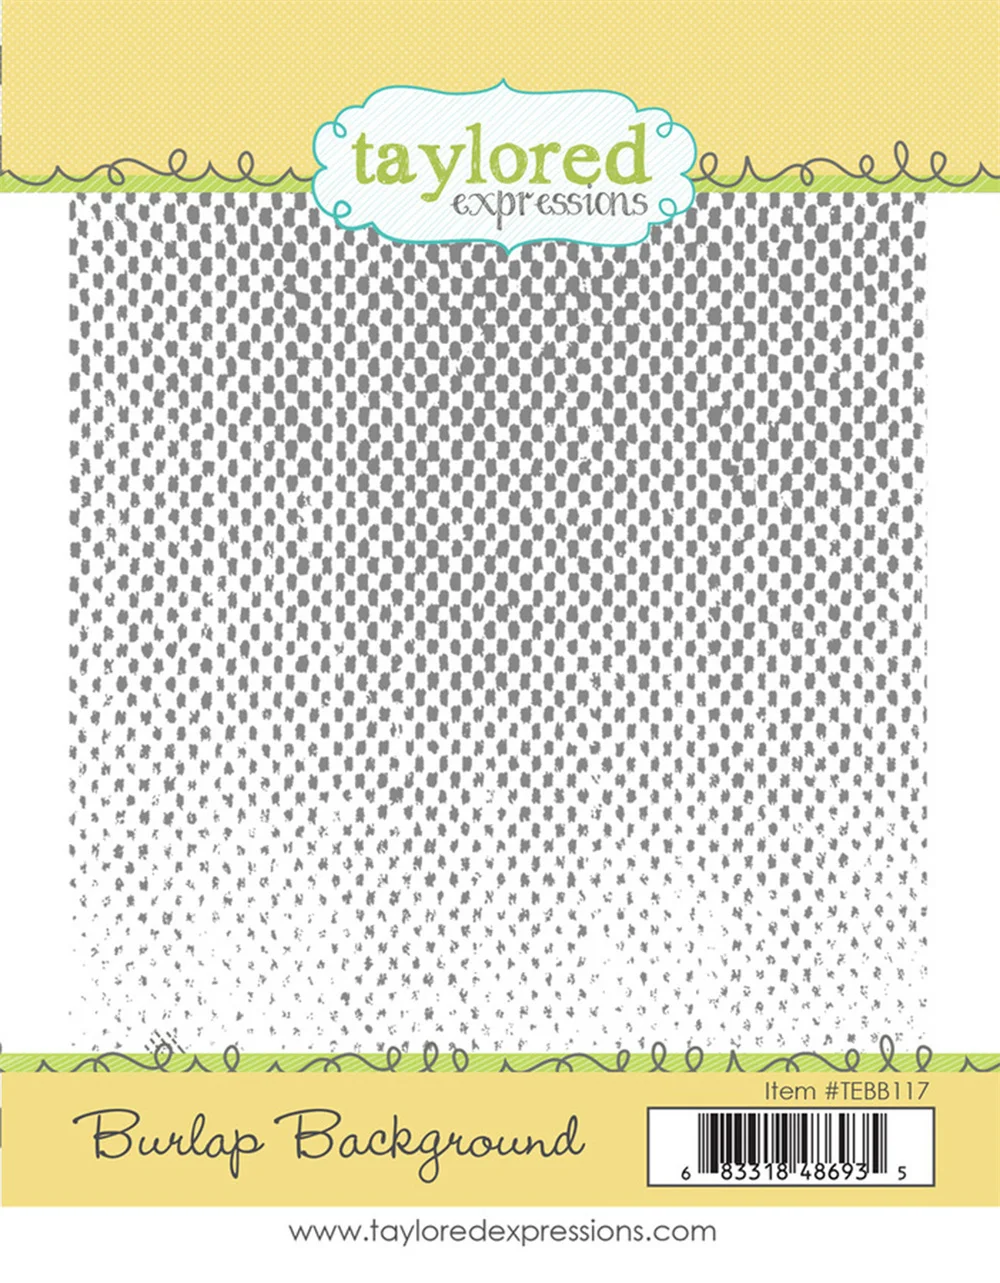 

Burlap Background 2021 Arrival New Top Selling Metal Cutting Stencil Diary Scrapbooking Easter Craft Engraving Making Stencil